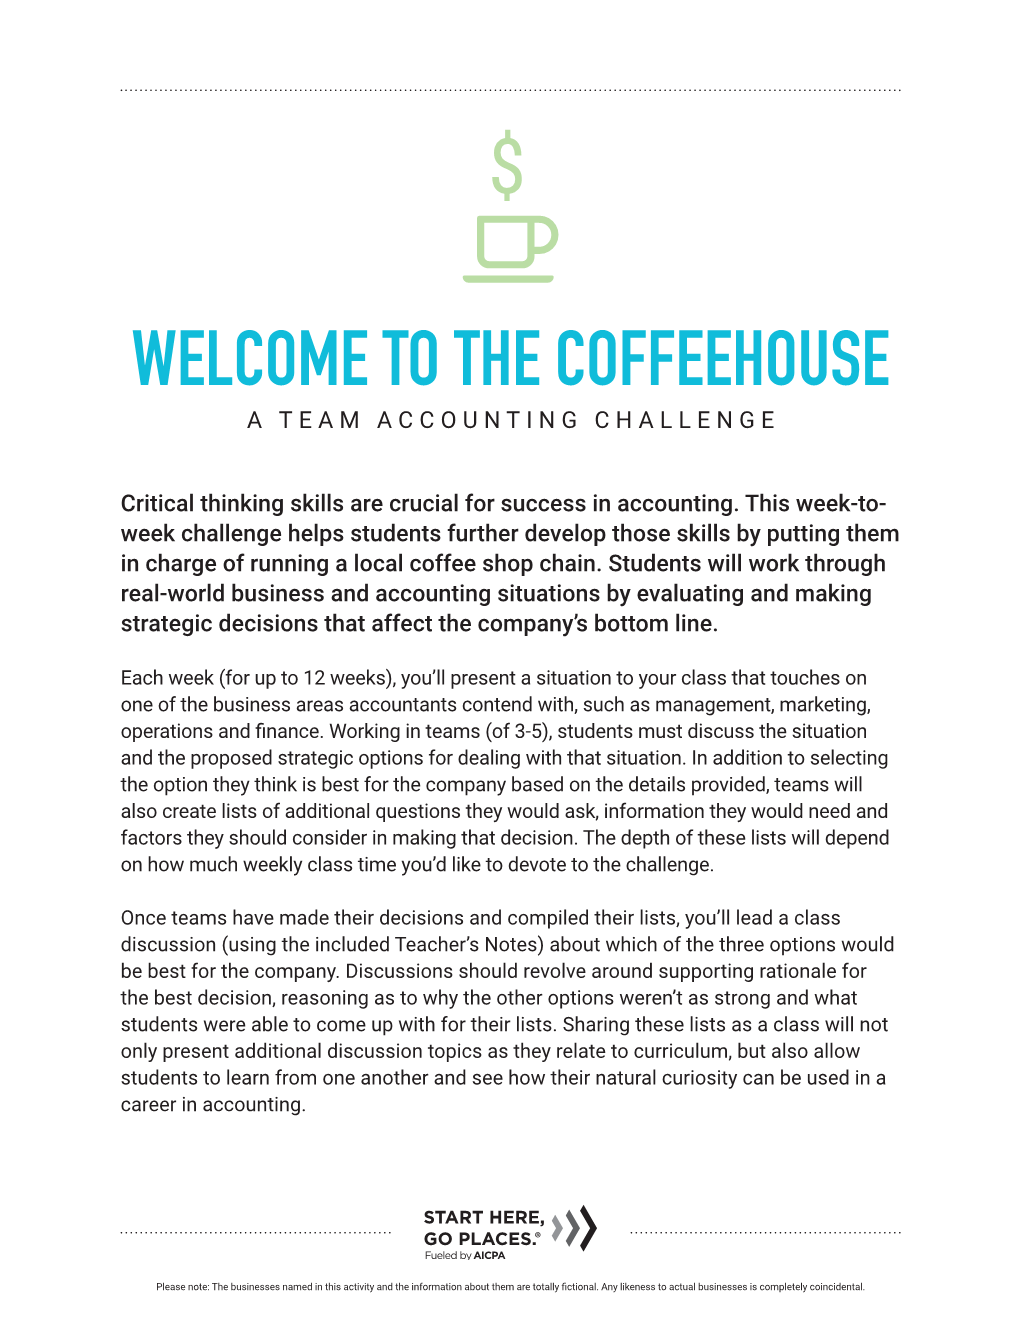 Welcome to the Coffeehouse $